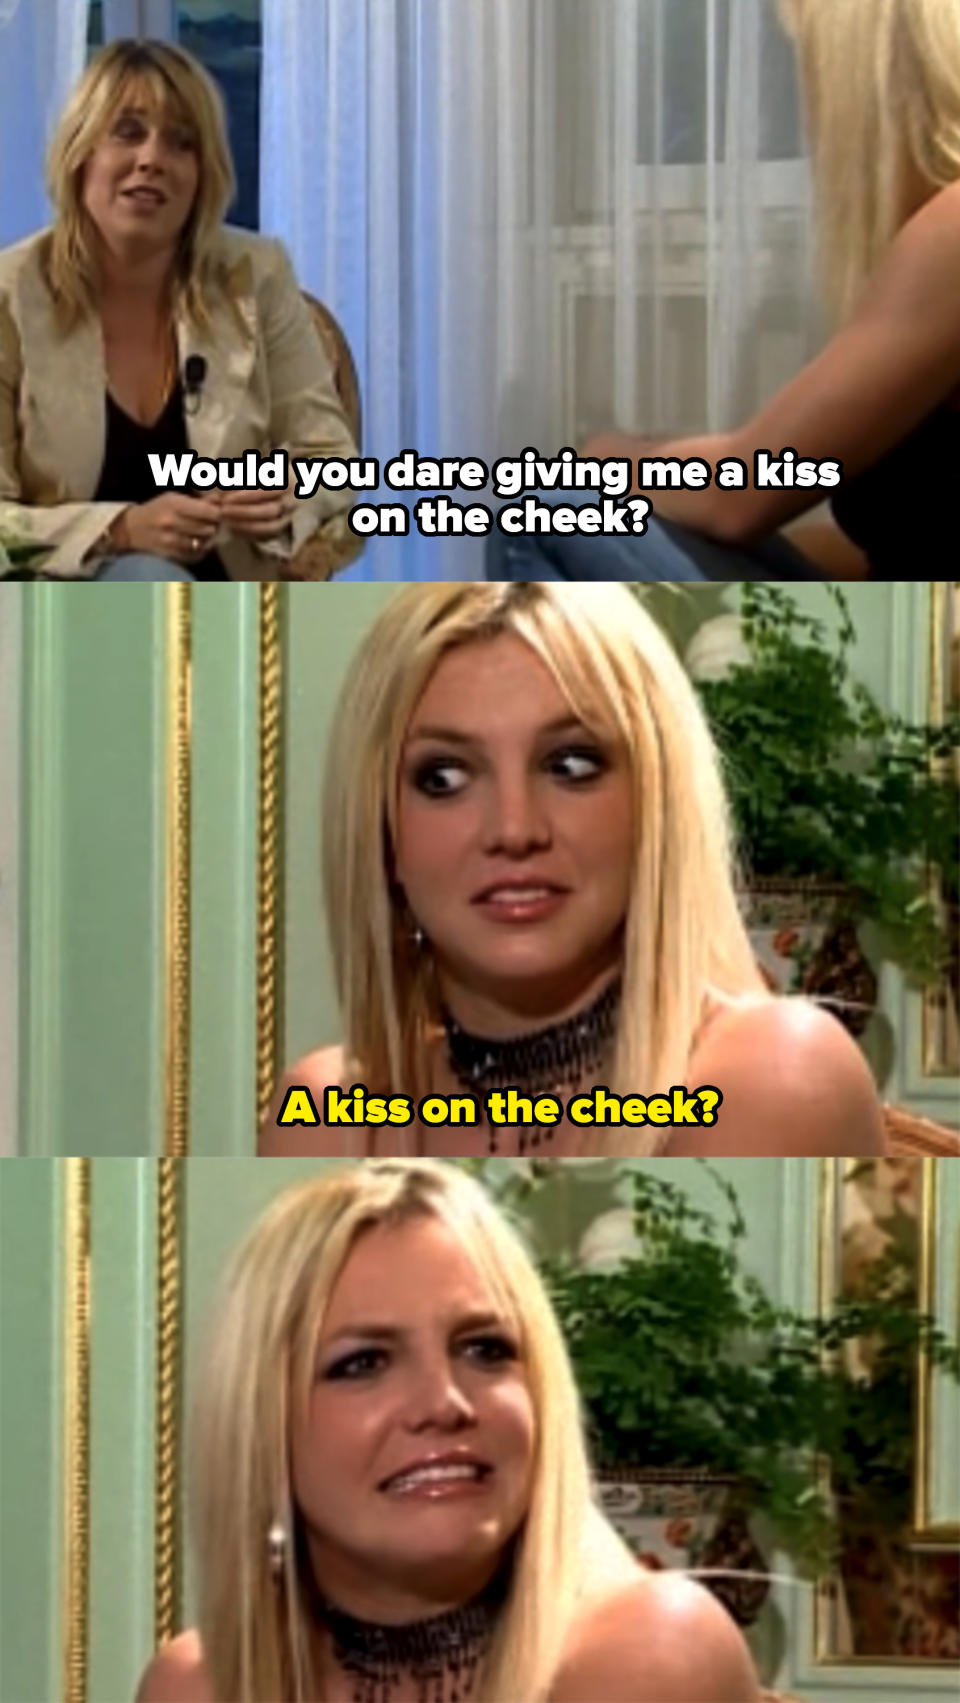 "Would you dare giving me a kiss on the cheek?" And Britney says "A kiss on the cheek?" and looks shocked and confused